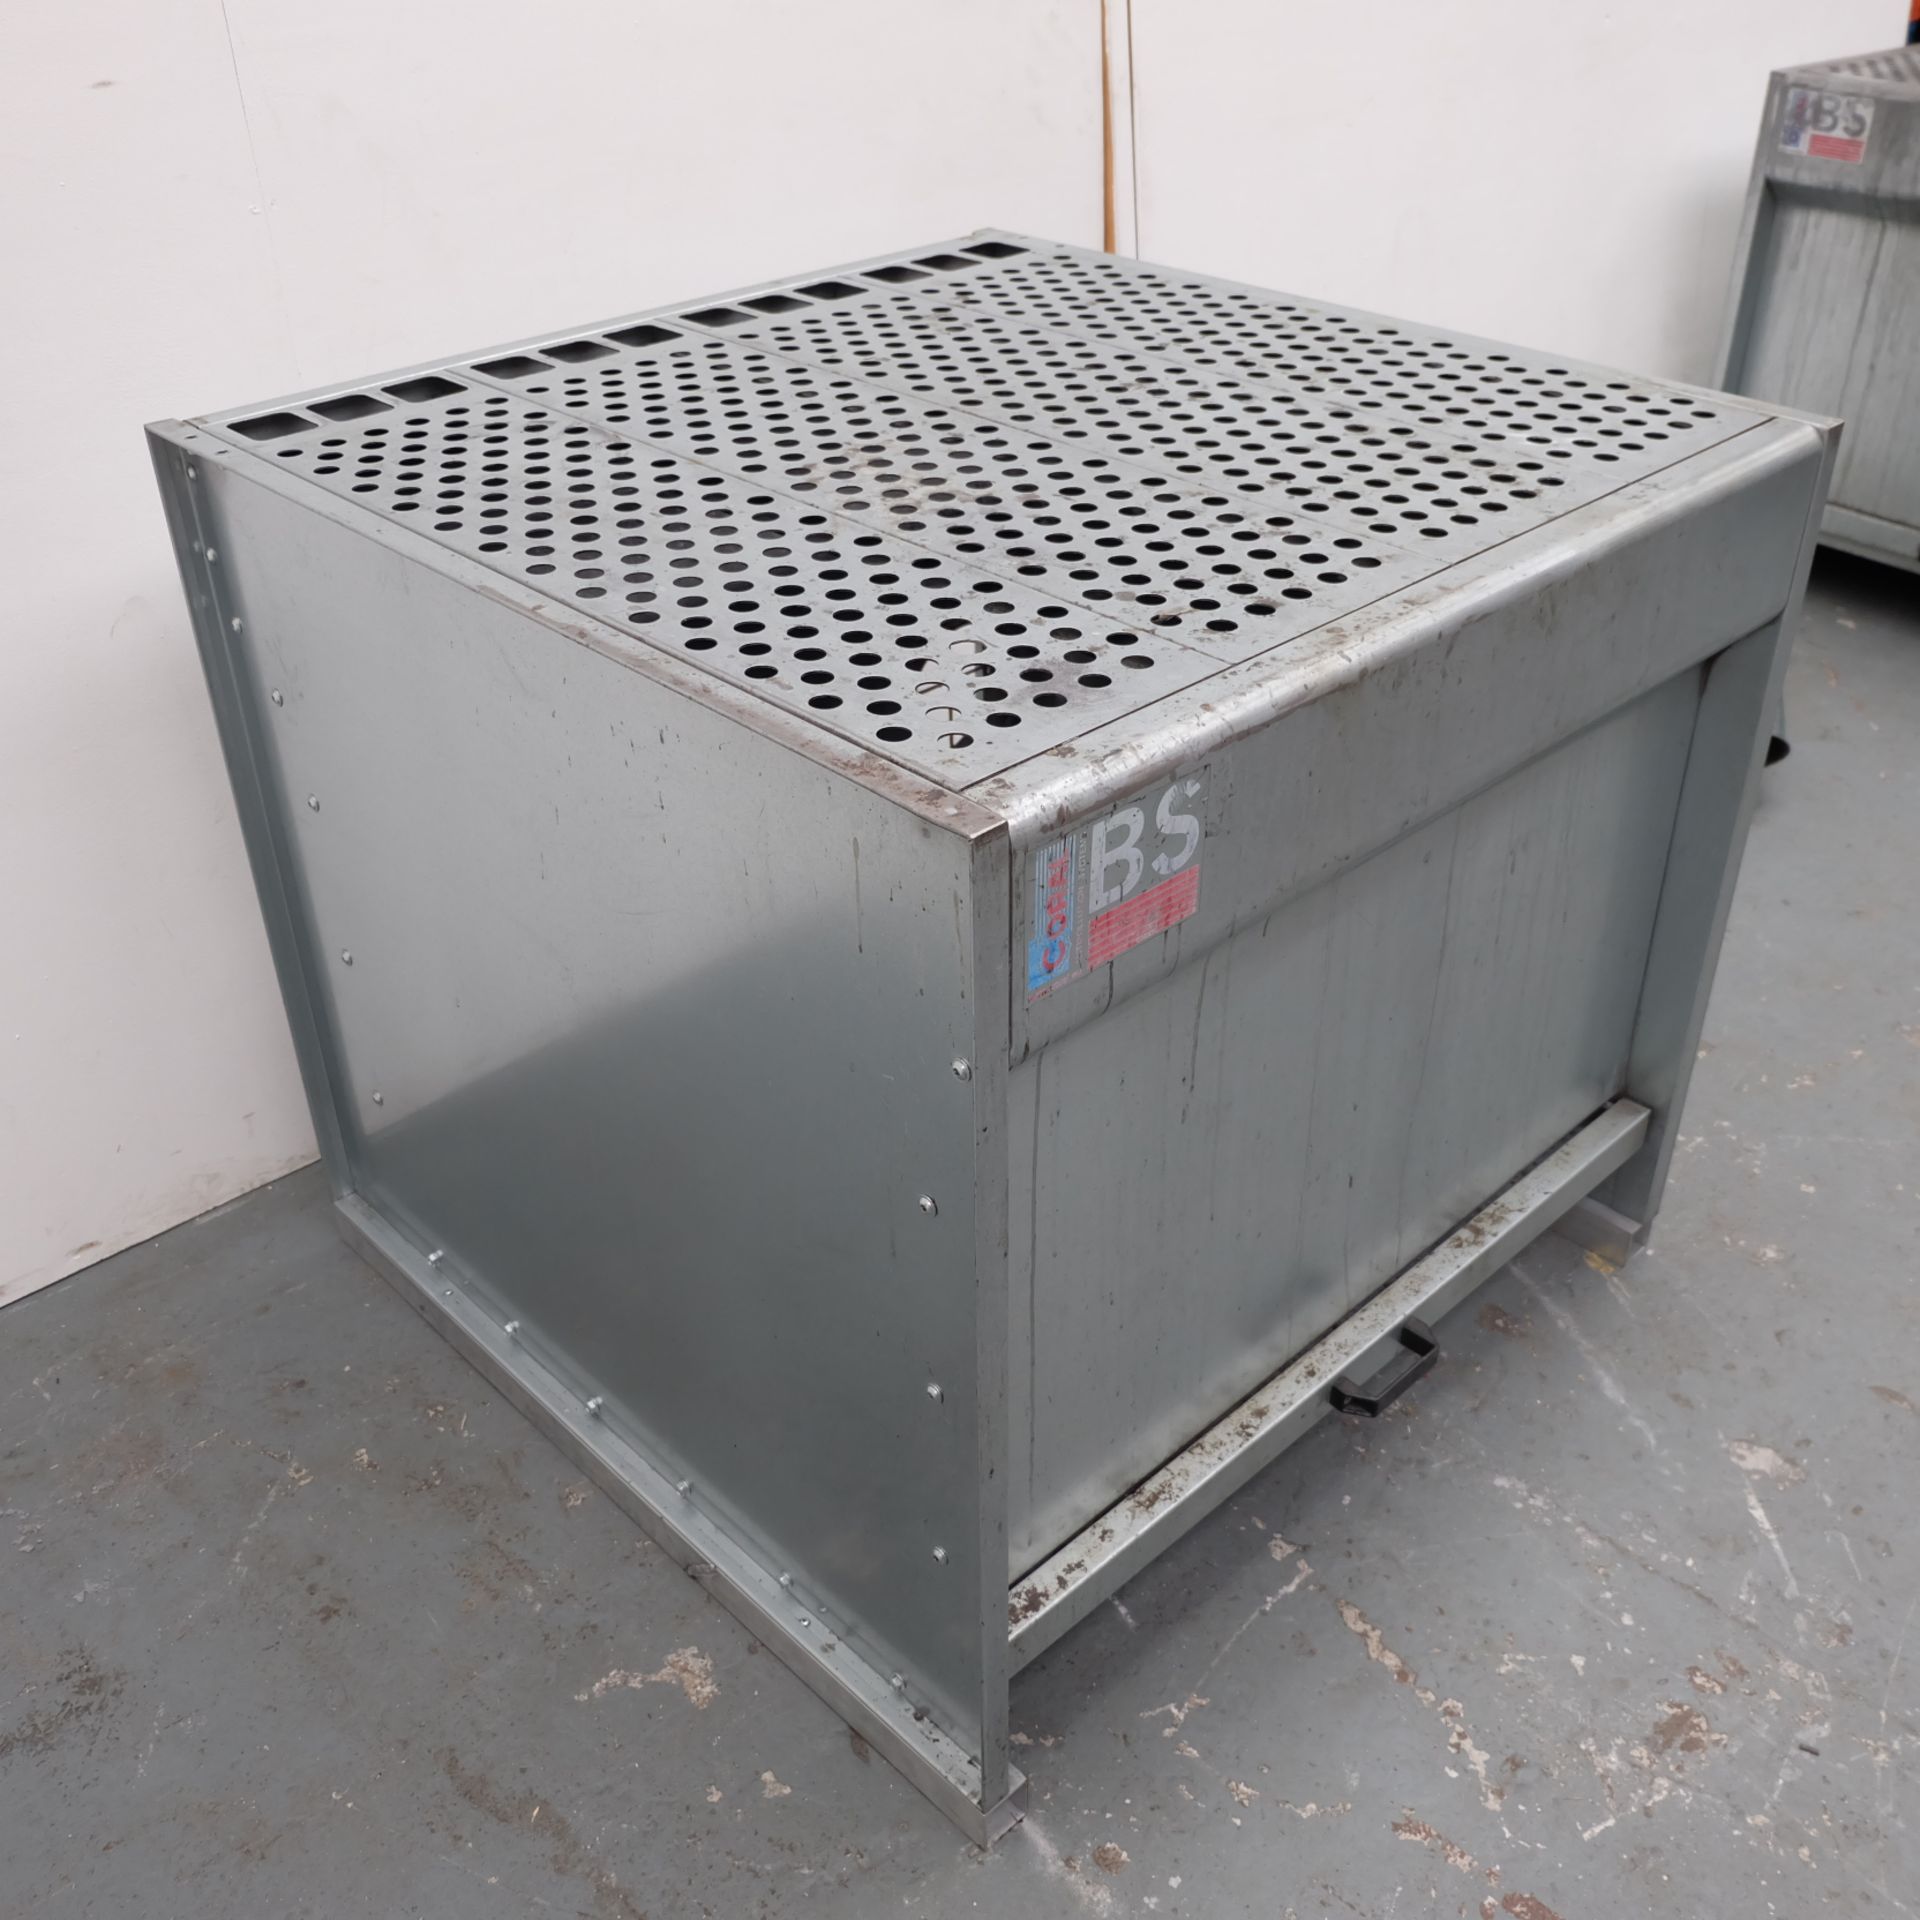 Coral BS/S Welding Bench Without Fan. Size: 42" x 42". Work Height: 36". Made From Galvanised Steel - Image 3 of 4